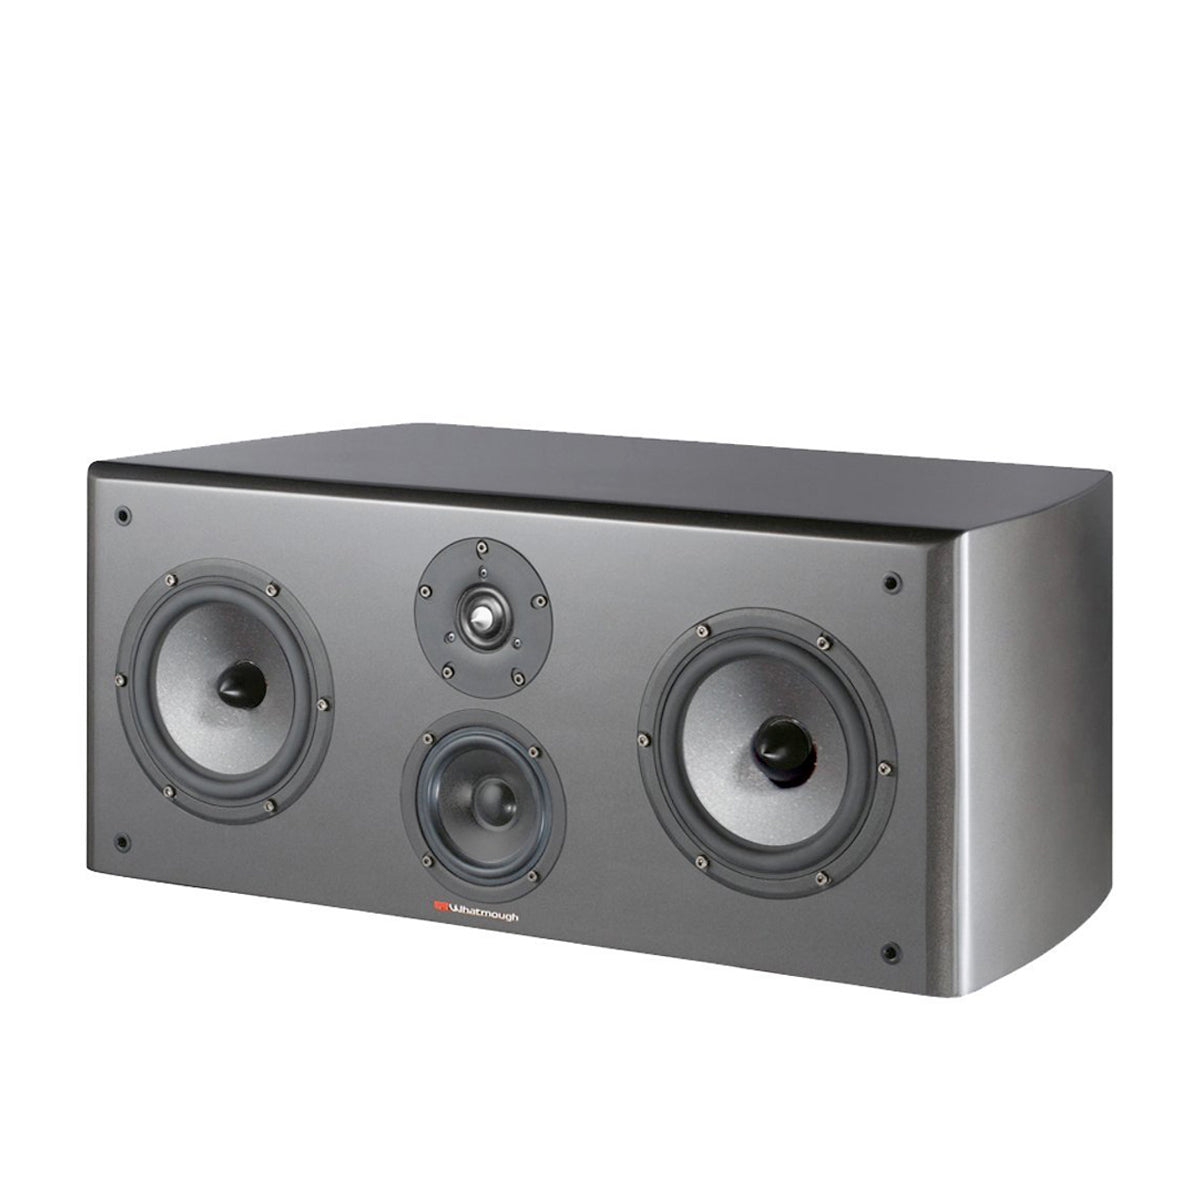 Whatmough S8i 3-Way Centre Speakers - The Audio Experts